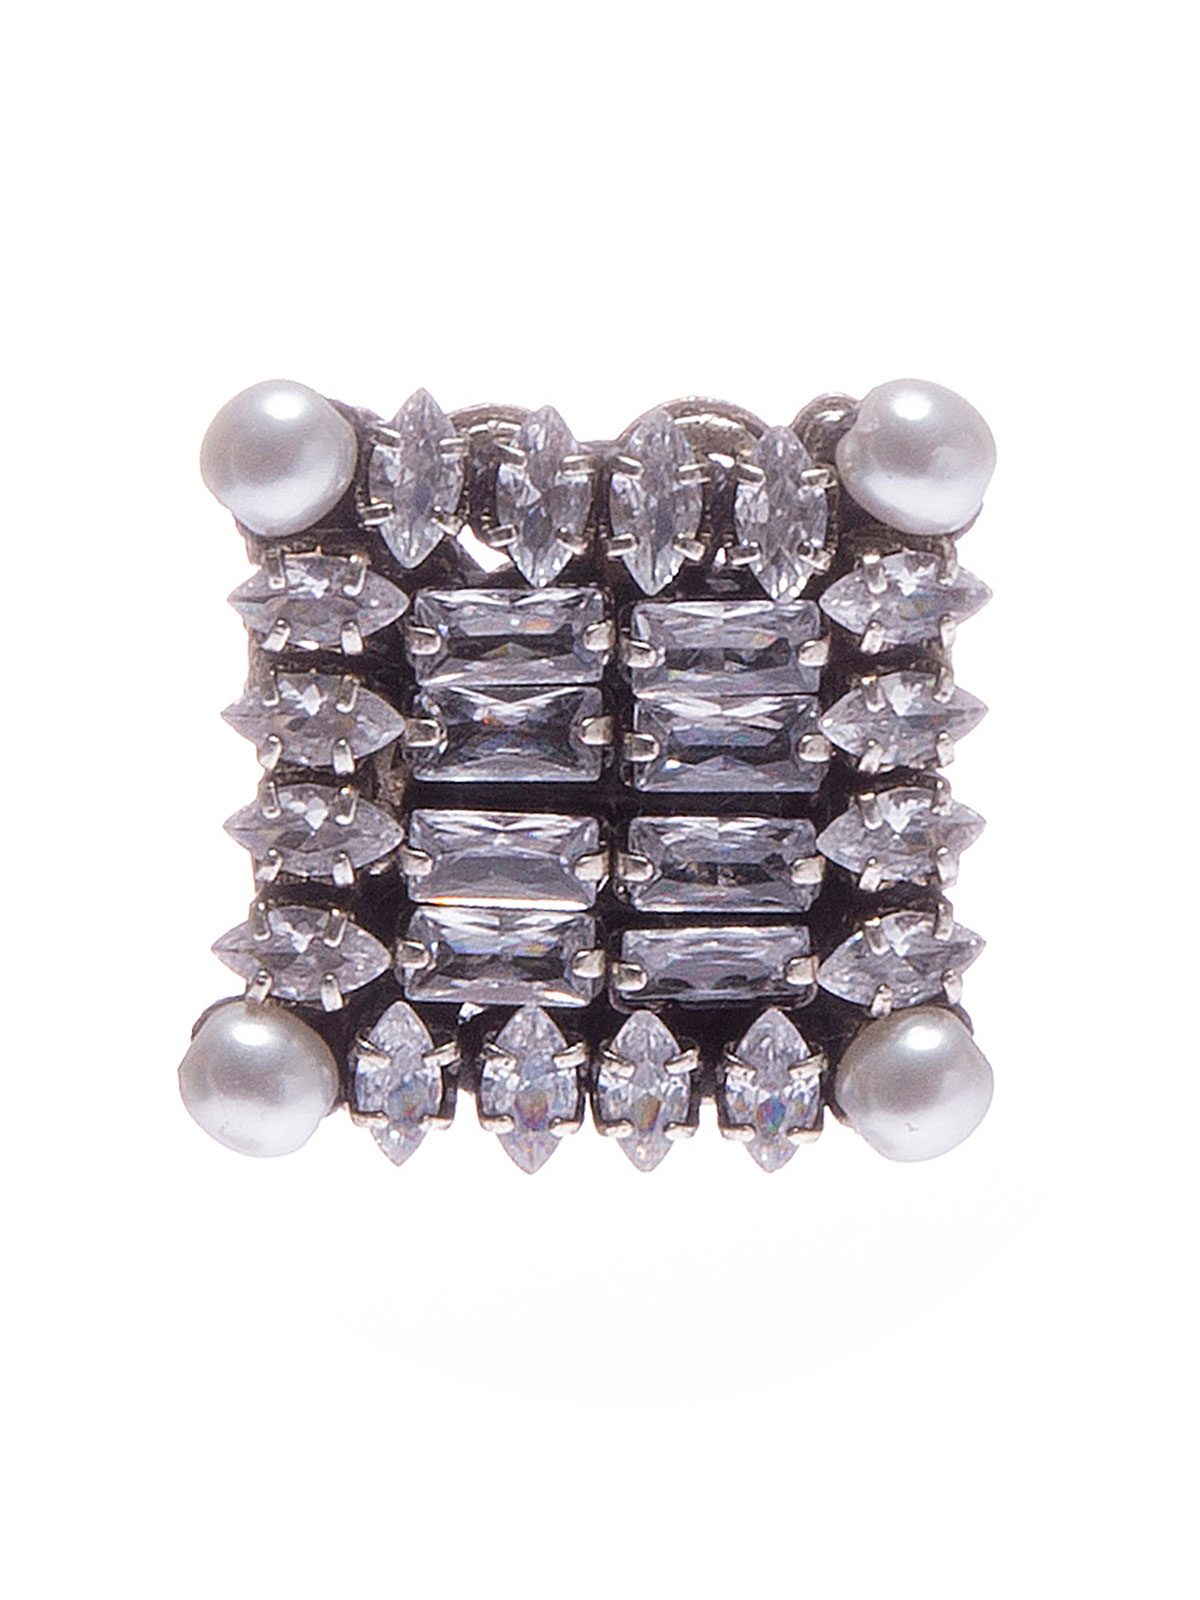 Square brooch embellished with crystals and pearls